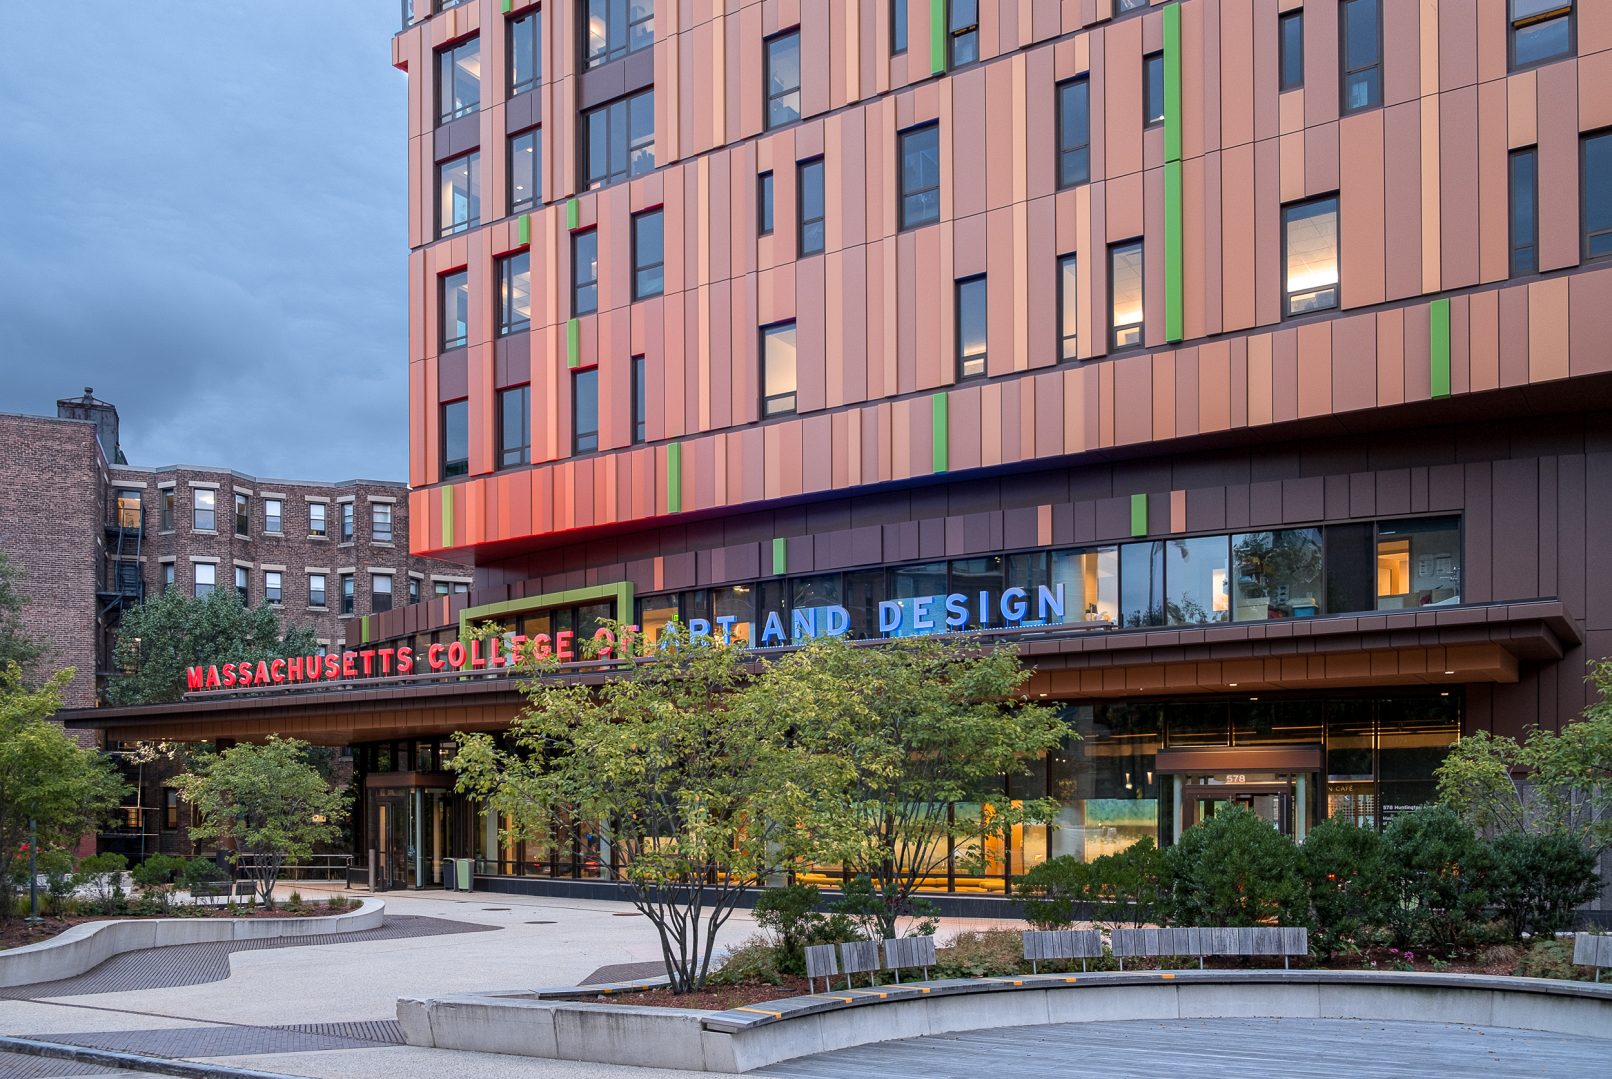 Architectural Photography of the Massachusetts College of Art and Design (MassArt) Tree House Student Residence in Boston Massachusetts designed by ADD Inc featuring a dramatic twilight image of the building lit against a dark cloudy sky